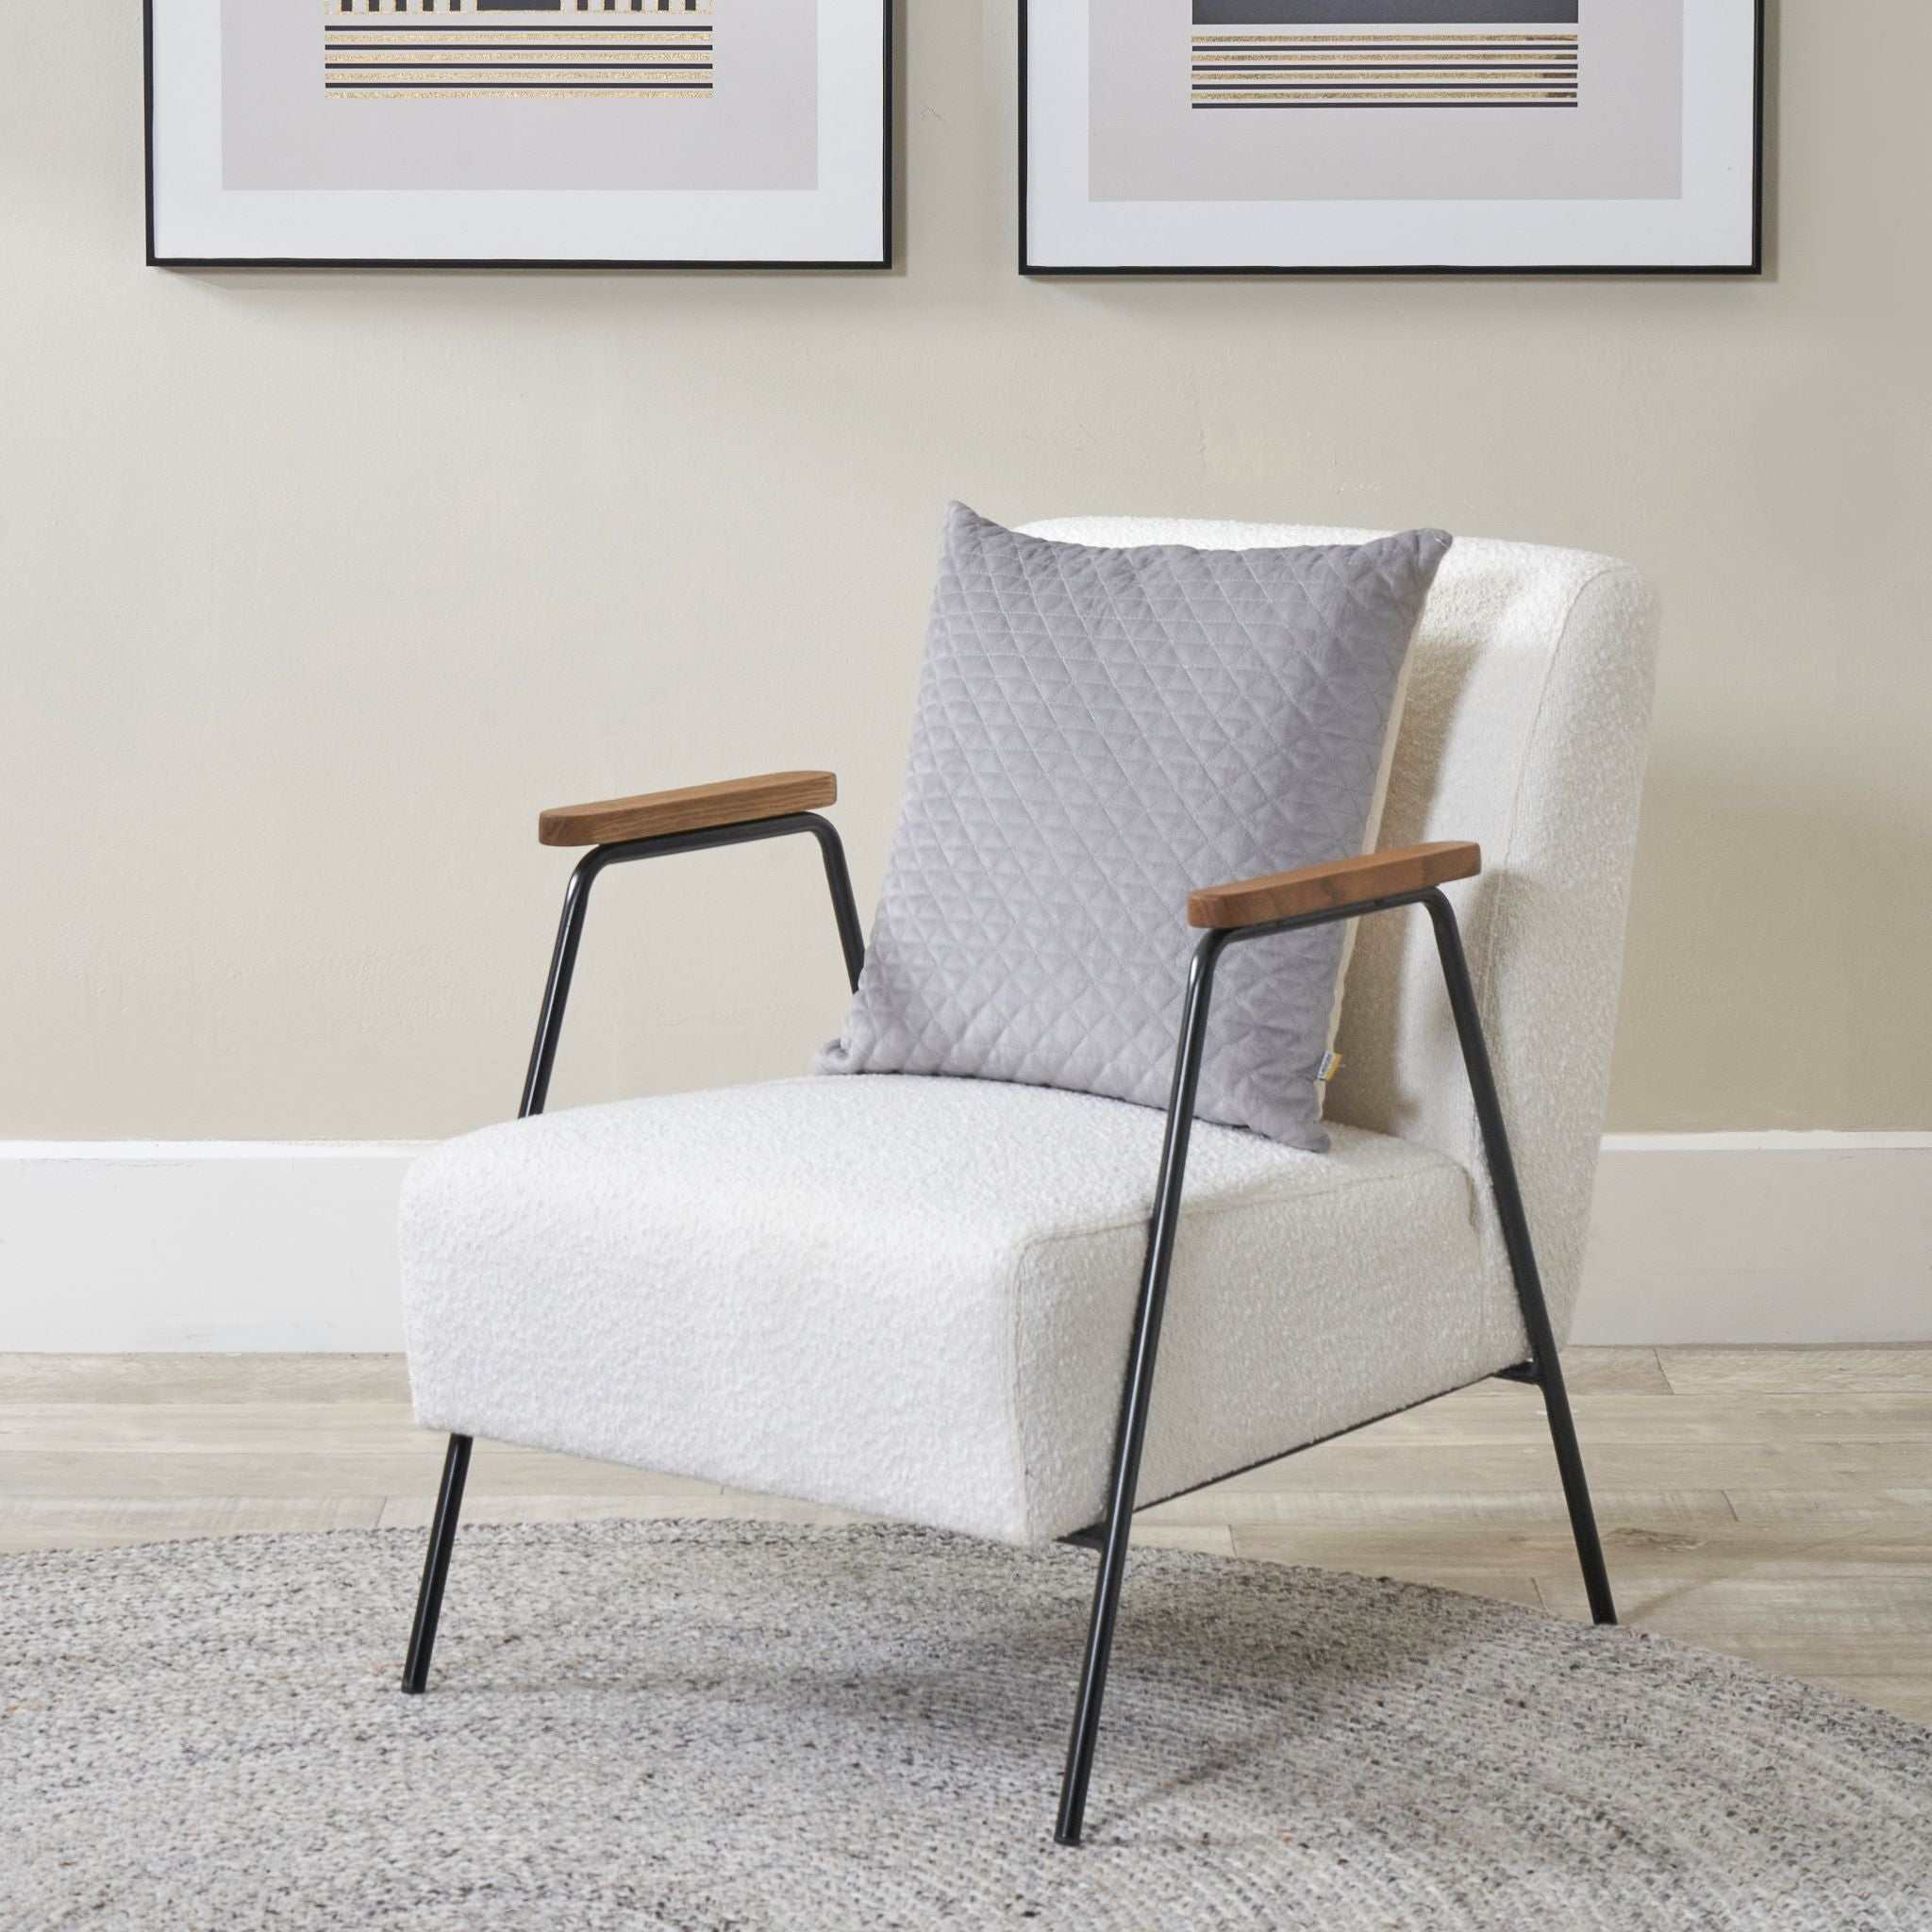 Matera Bouclé Chair With Black Legs and Wooden Arms